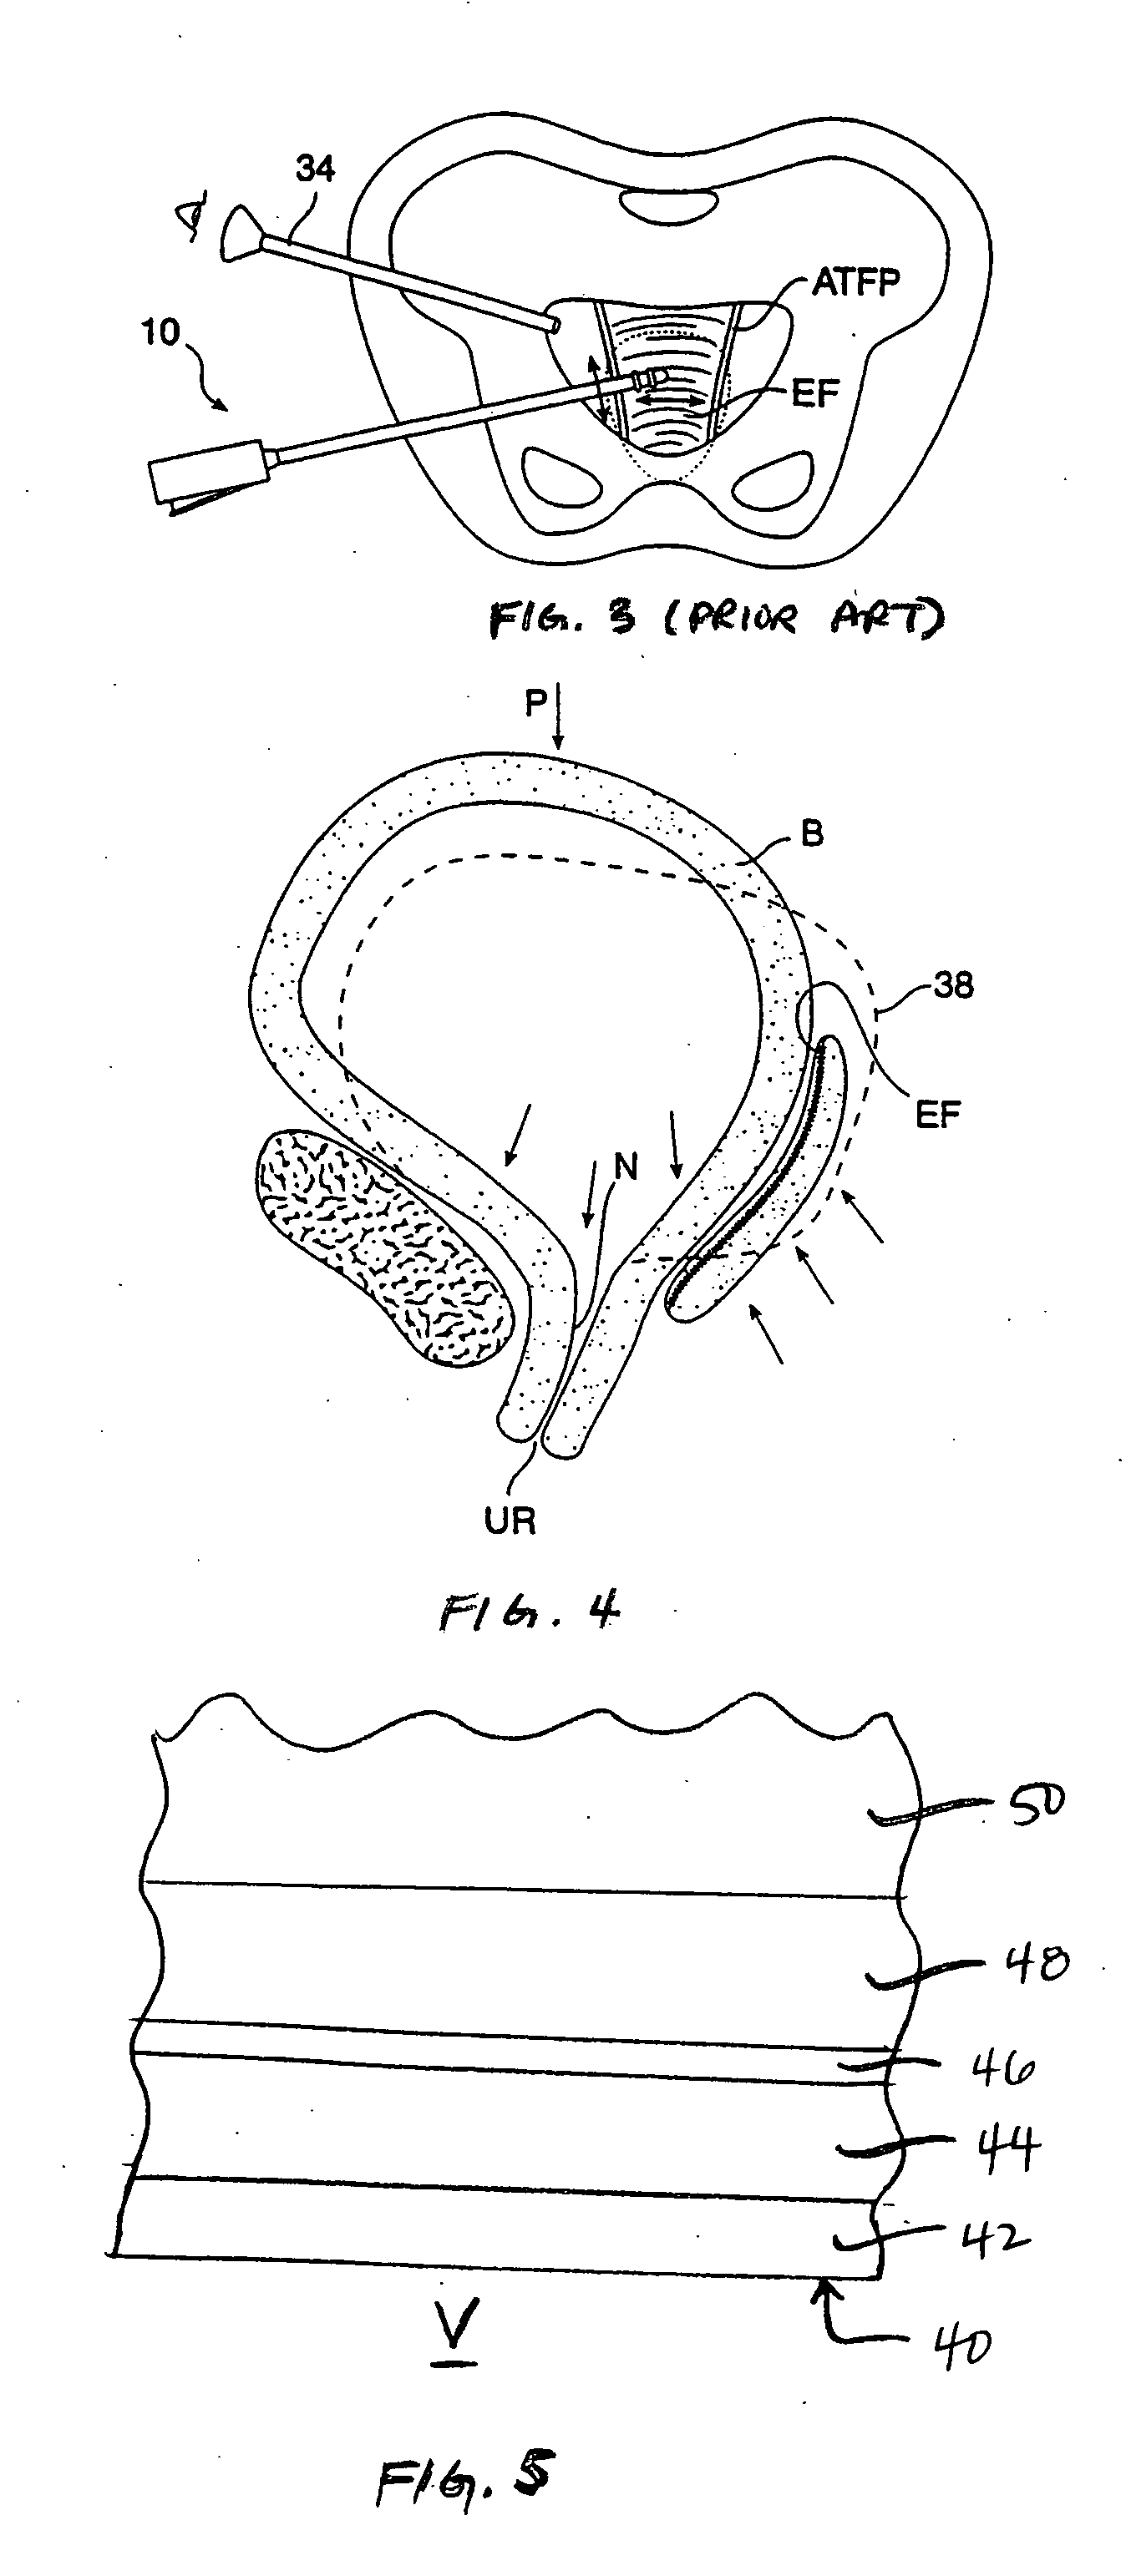 Endo-pelvic fascia penetrating heating systems and methods for incontinence treatment